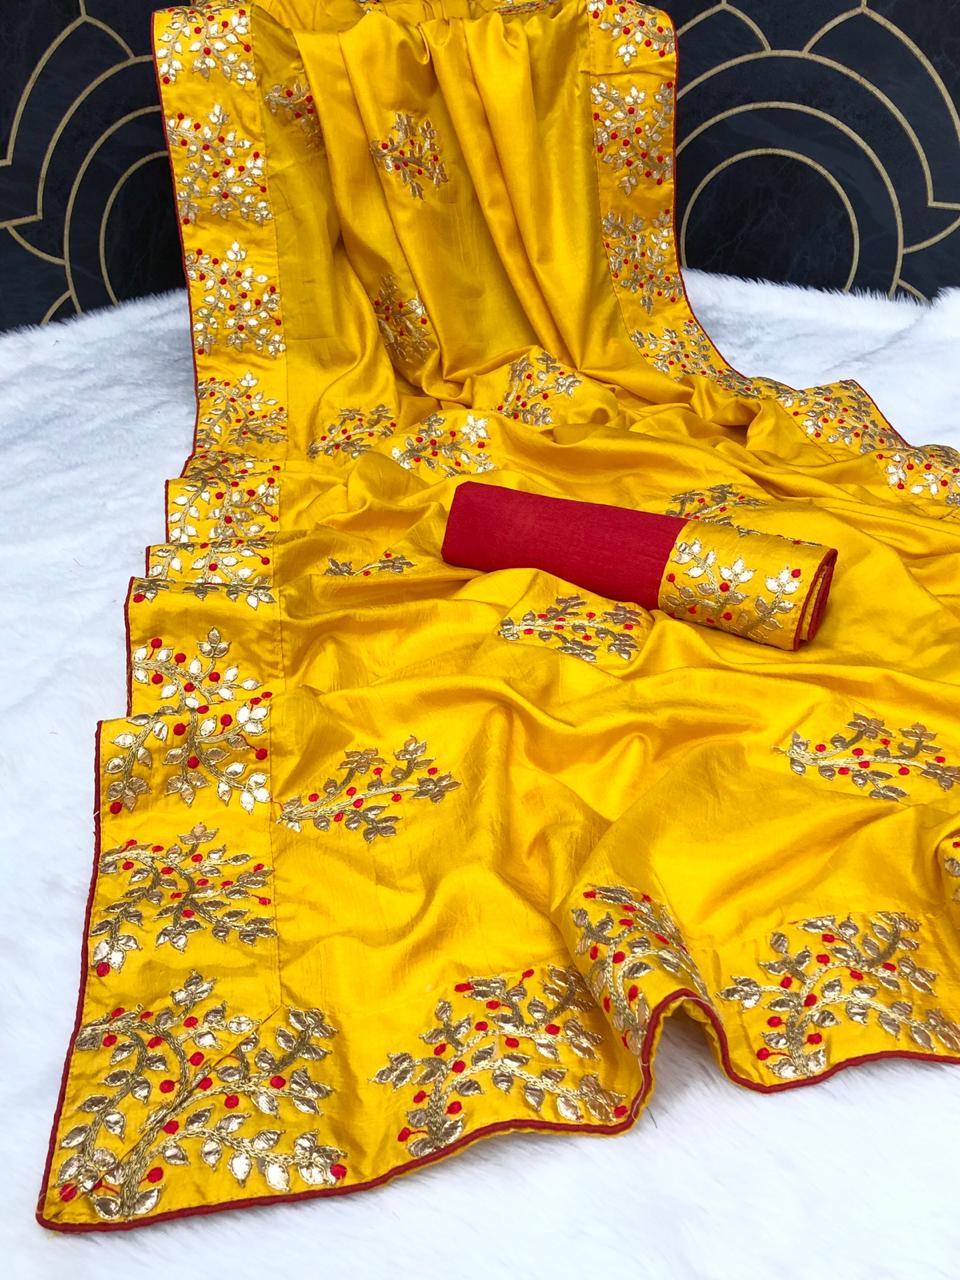 Pure Dola Silk Sarees With Exclusive Design Work On It At Be...